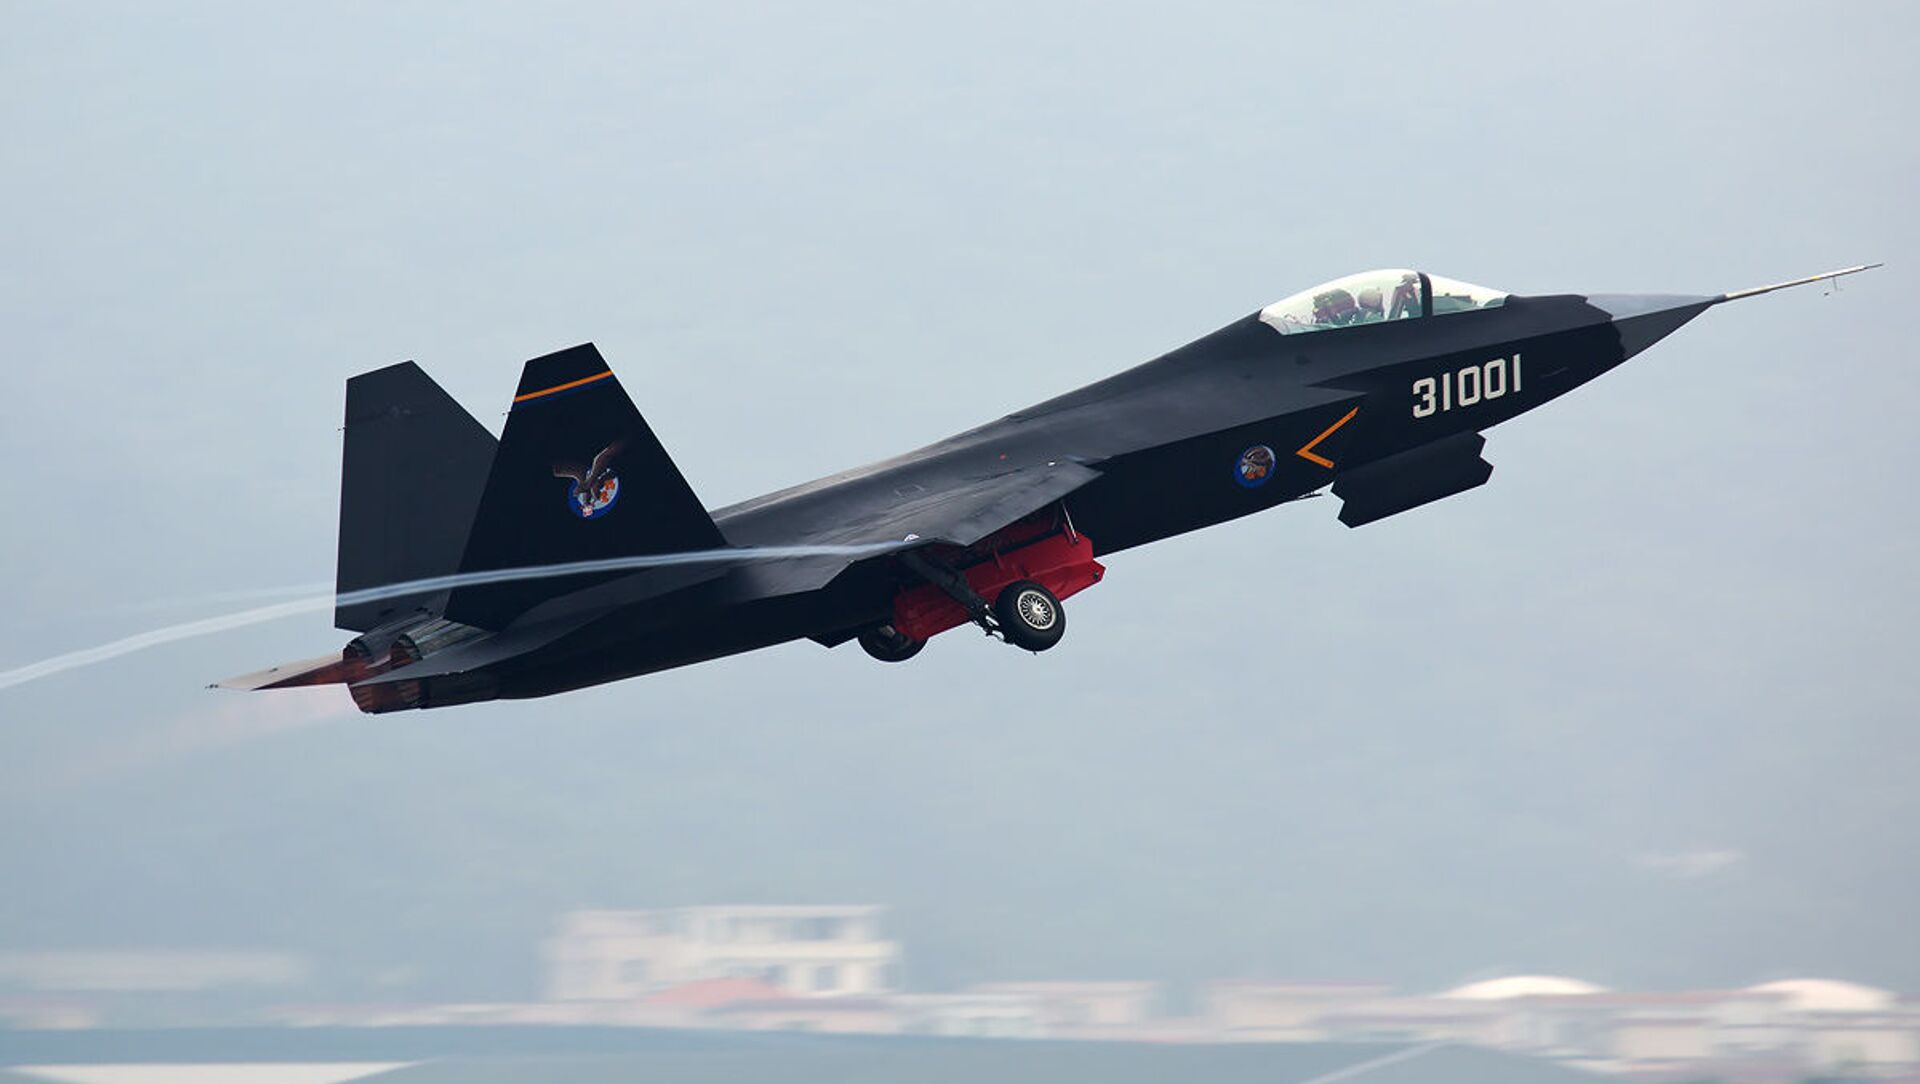 Shenyang Aircraft Corporation's FC-31 Gyrfalcon stealth fighter prototype at the 2014 Zhuhai Air Show in China - Sputnik International, 1920, 29.03.2021